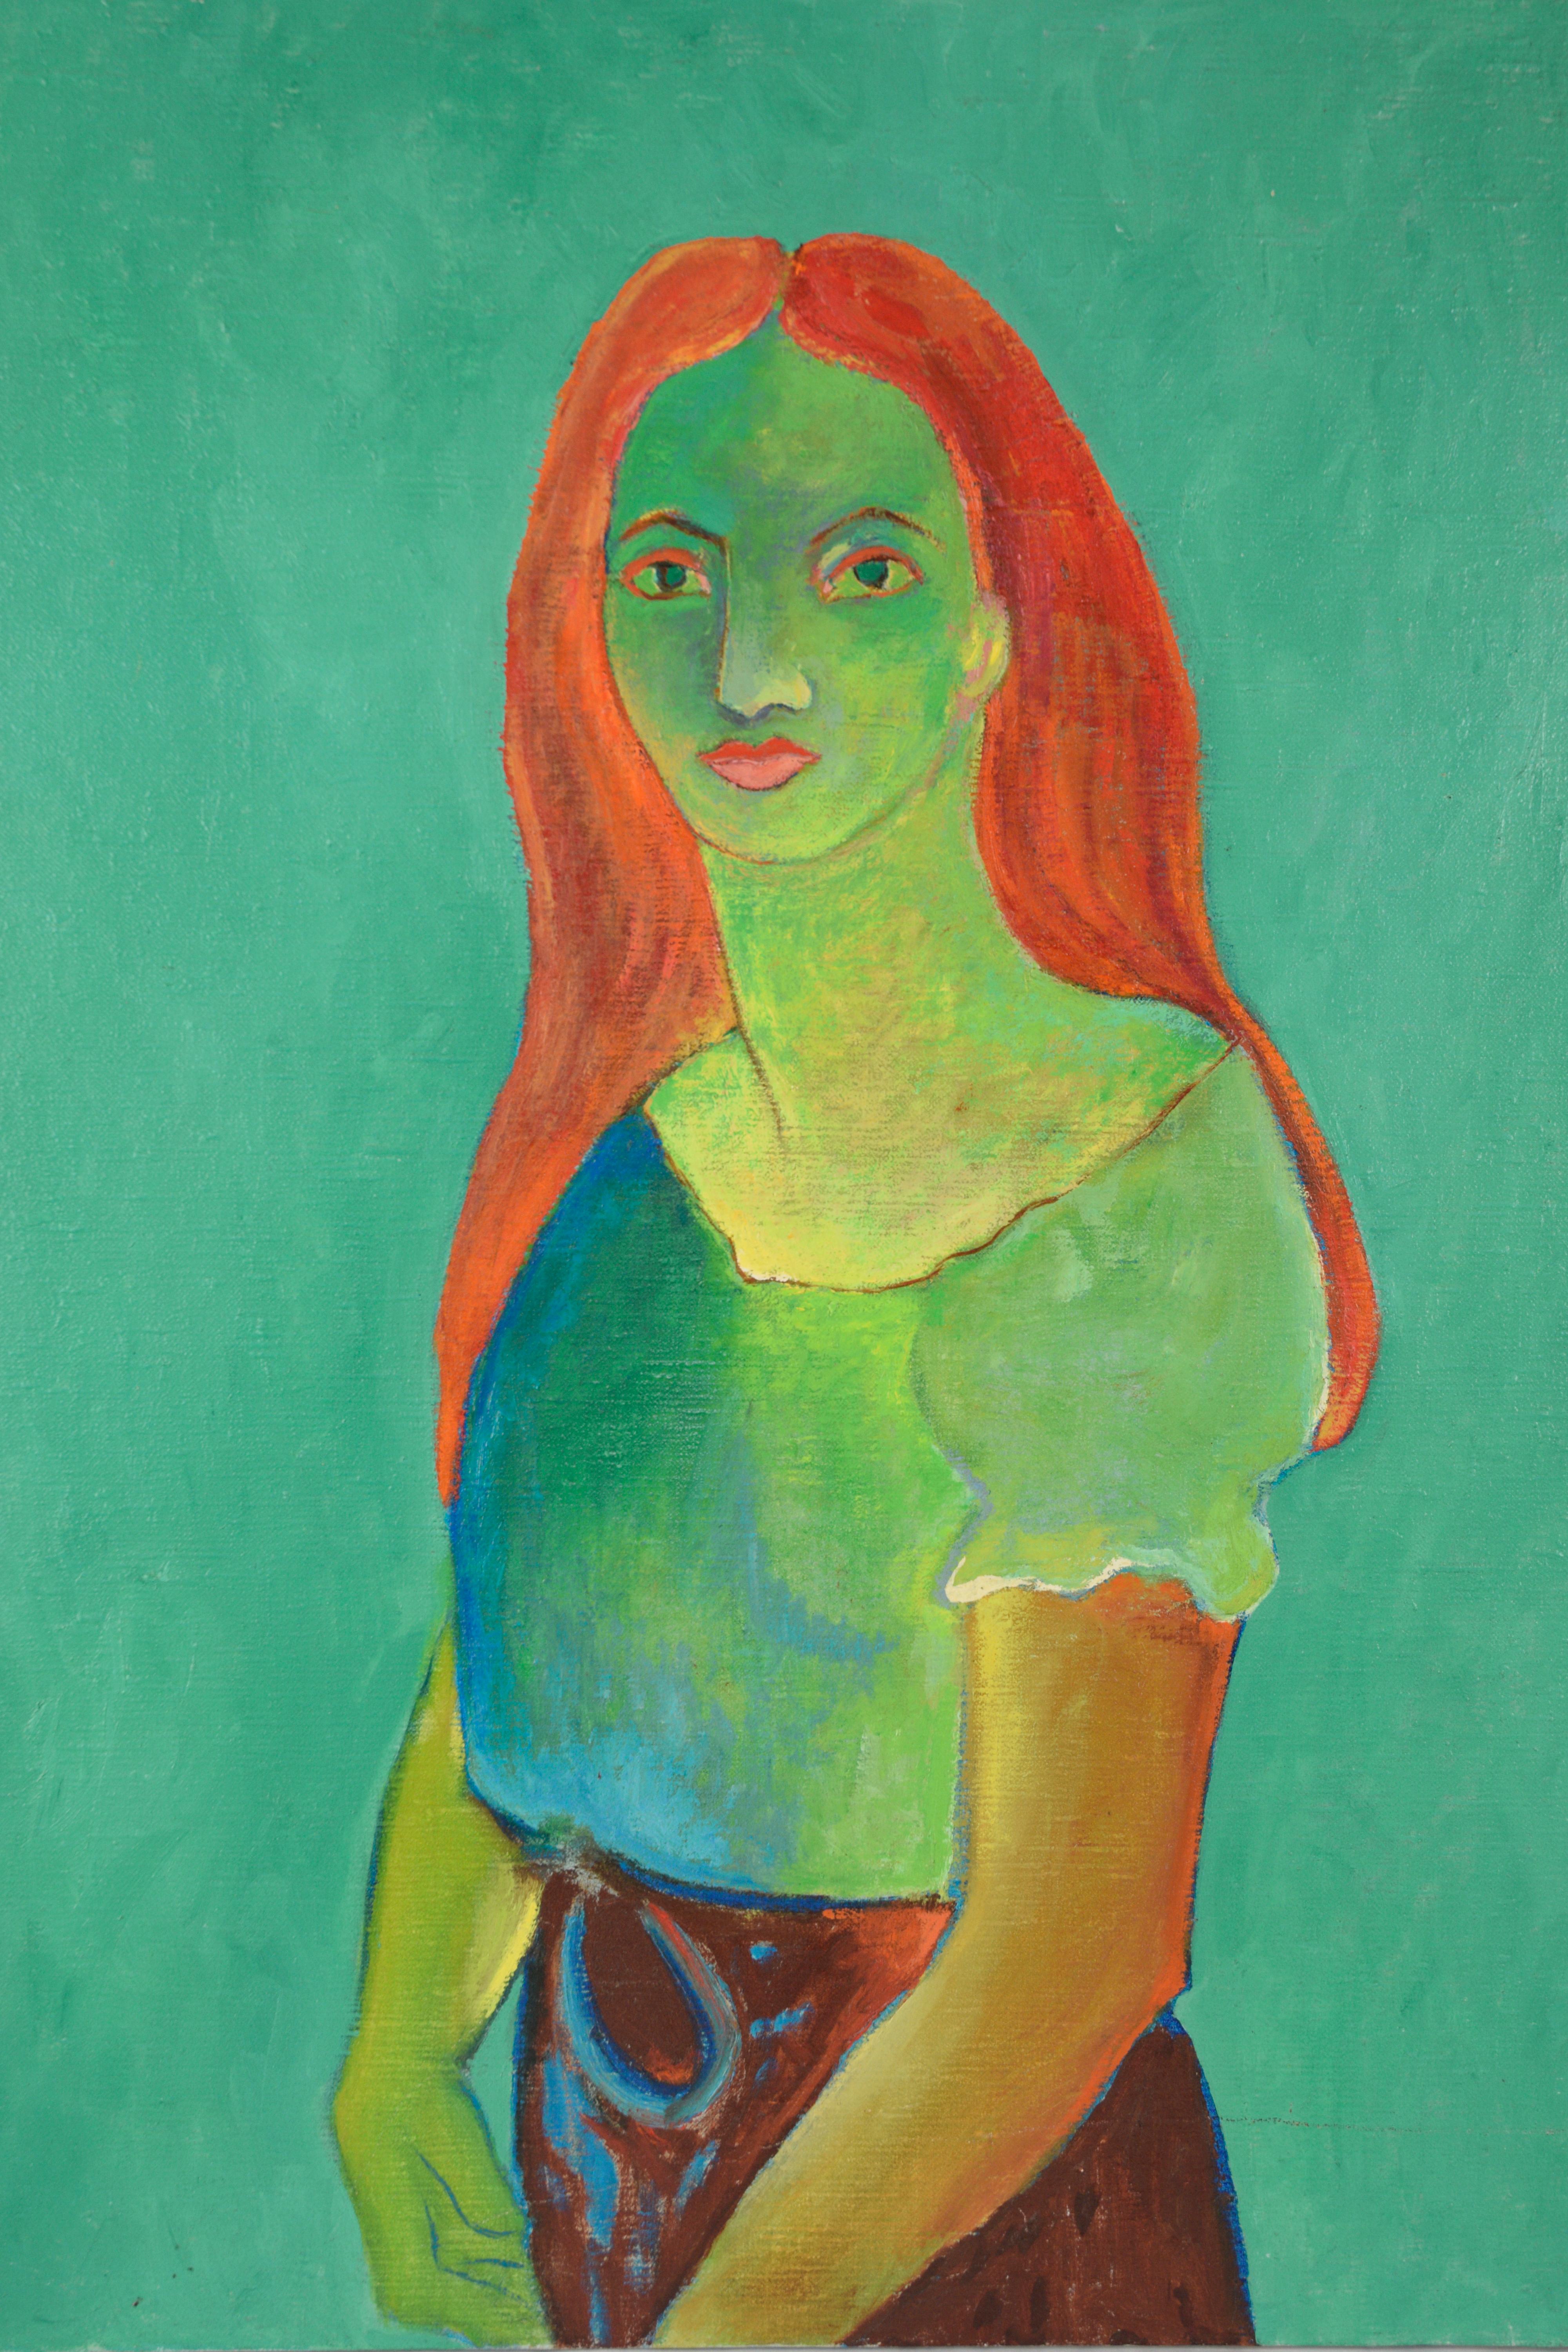 Mid Century Fauvist Portrait of Red Headed Woman - Painting by Sydney Helfman